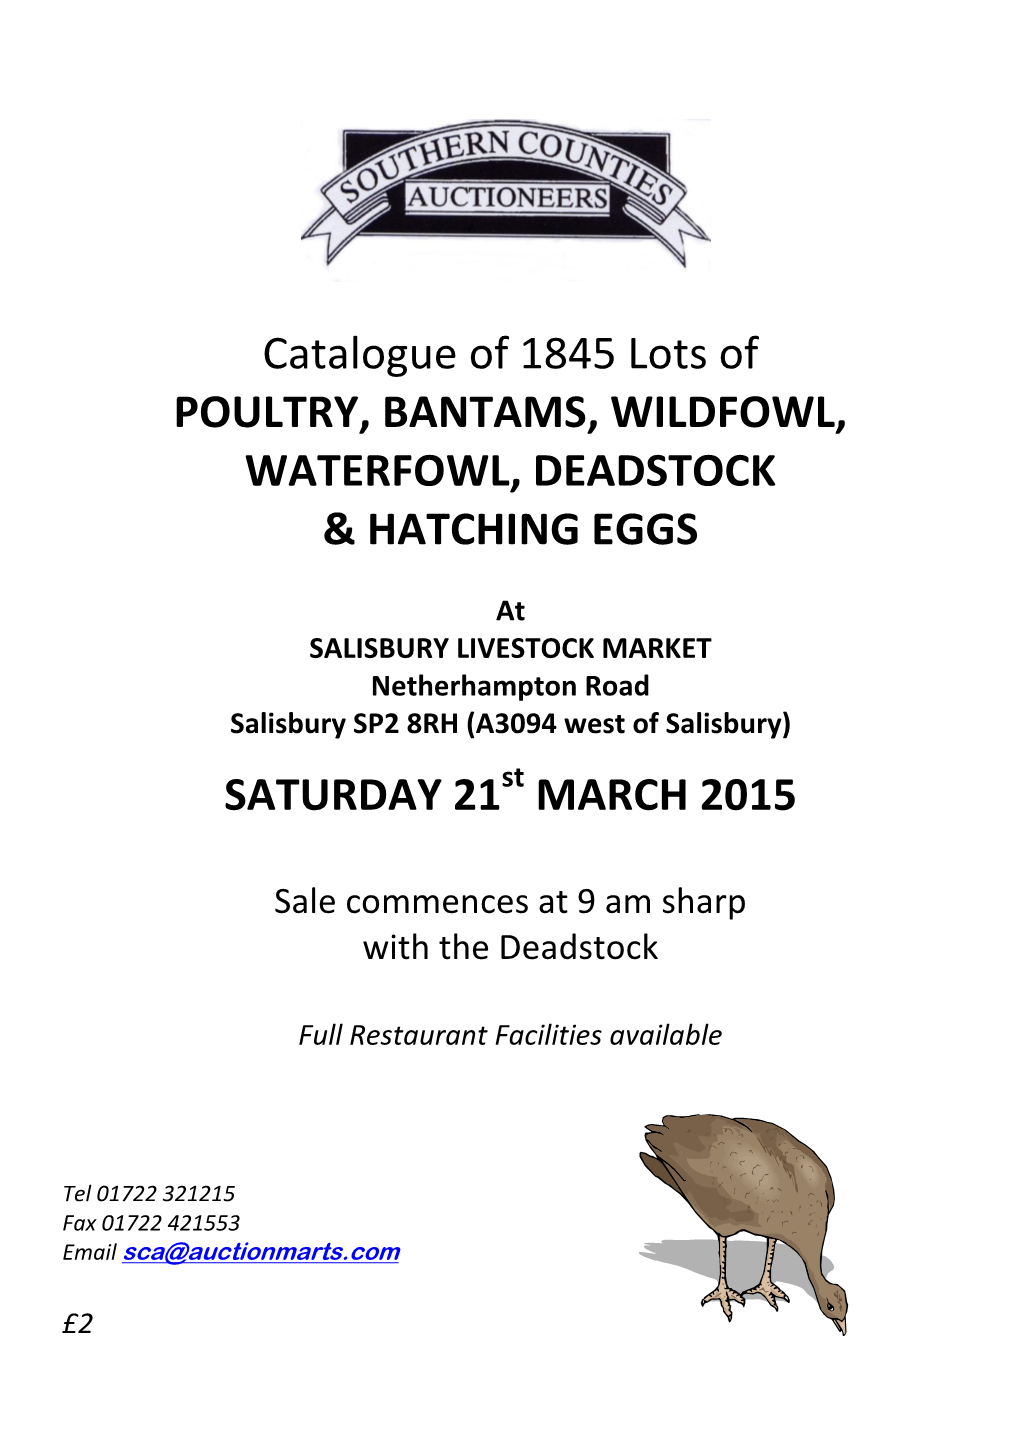 Catalogue of 1845 Lots of POULTRY, BANTAMS, WILDFOWL, WATERFOWL, DEADSTOCK & HATCHING EGGS SATURDAY 21 MARCH 2015